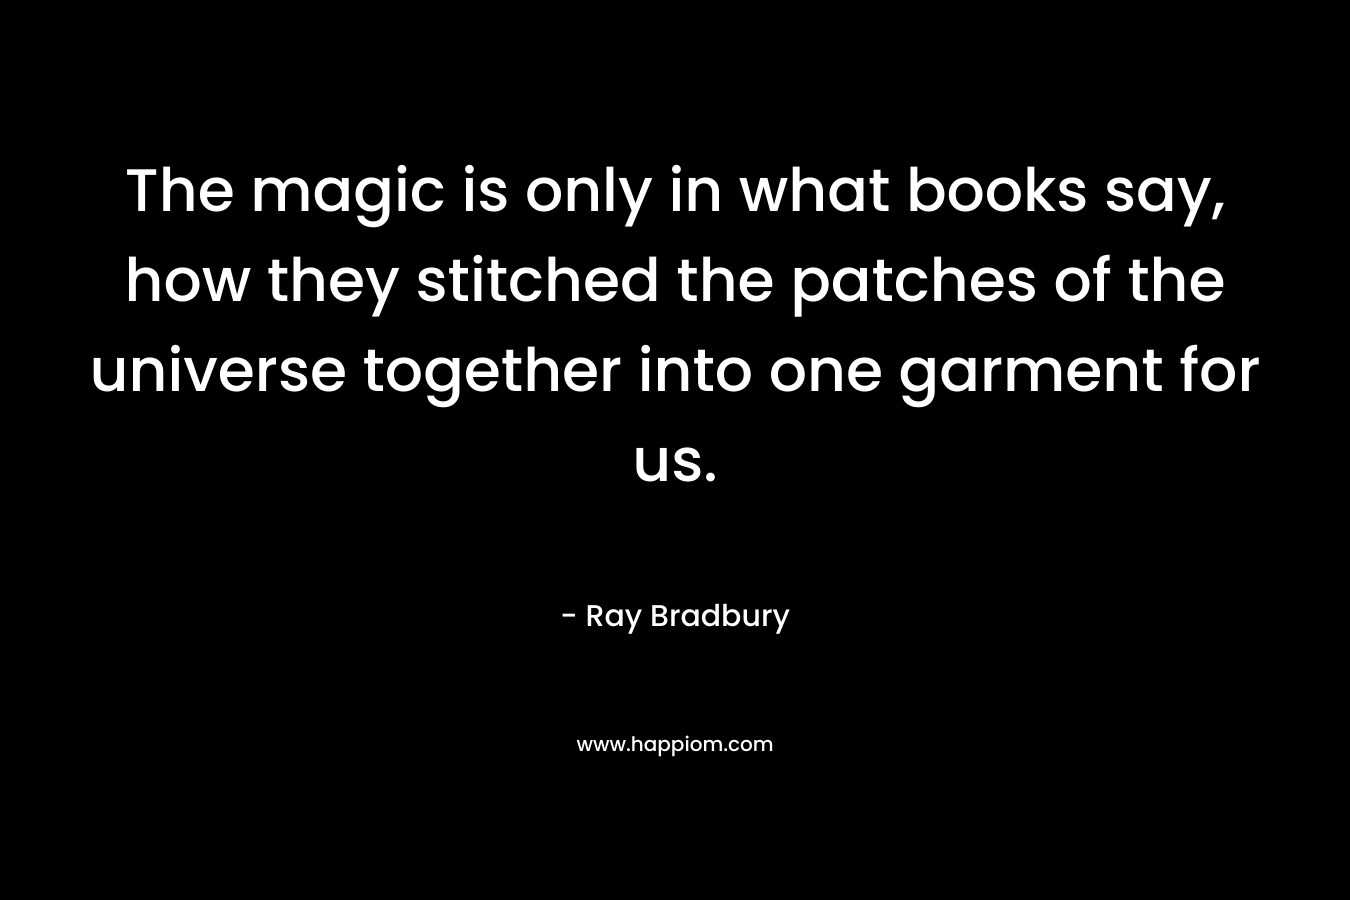 The magic is only in what books say, how they stitched the patches of the universe together into one garment for us. – Ray Bradbury